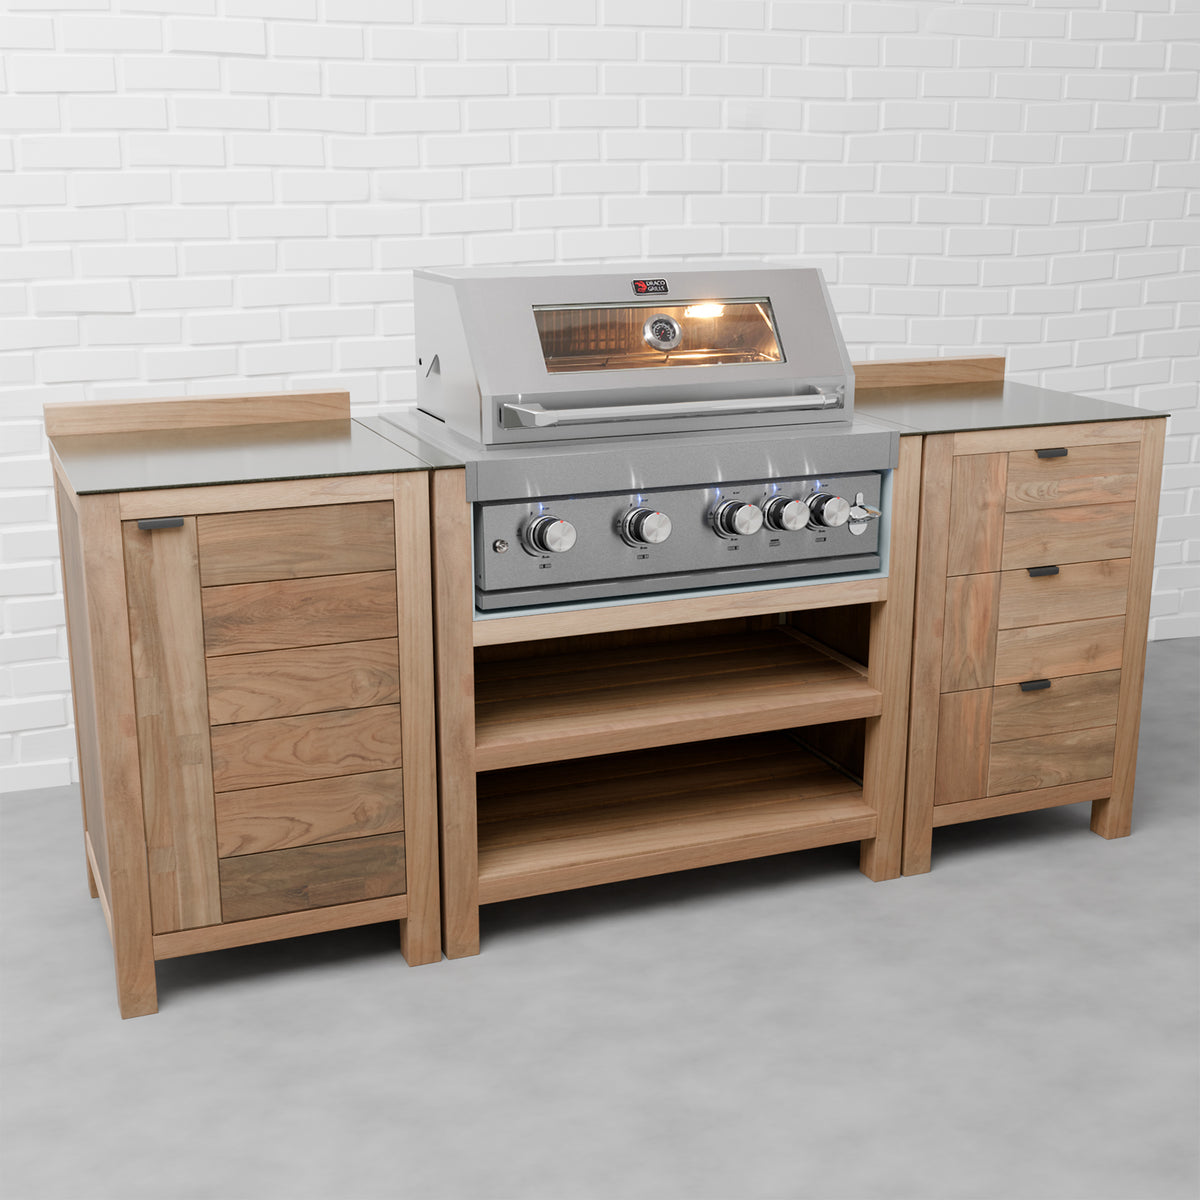 Draco Grills Teak 4 Burner Outdoor Kitchen with Modular Single Cupboard and Triple Drawer Unit